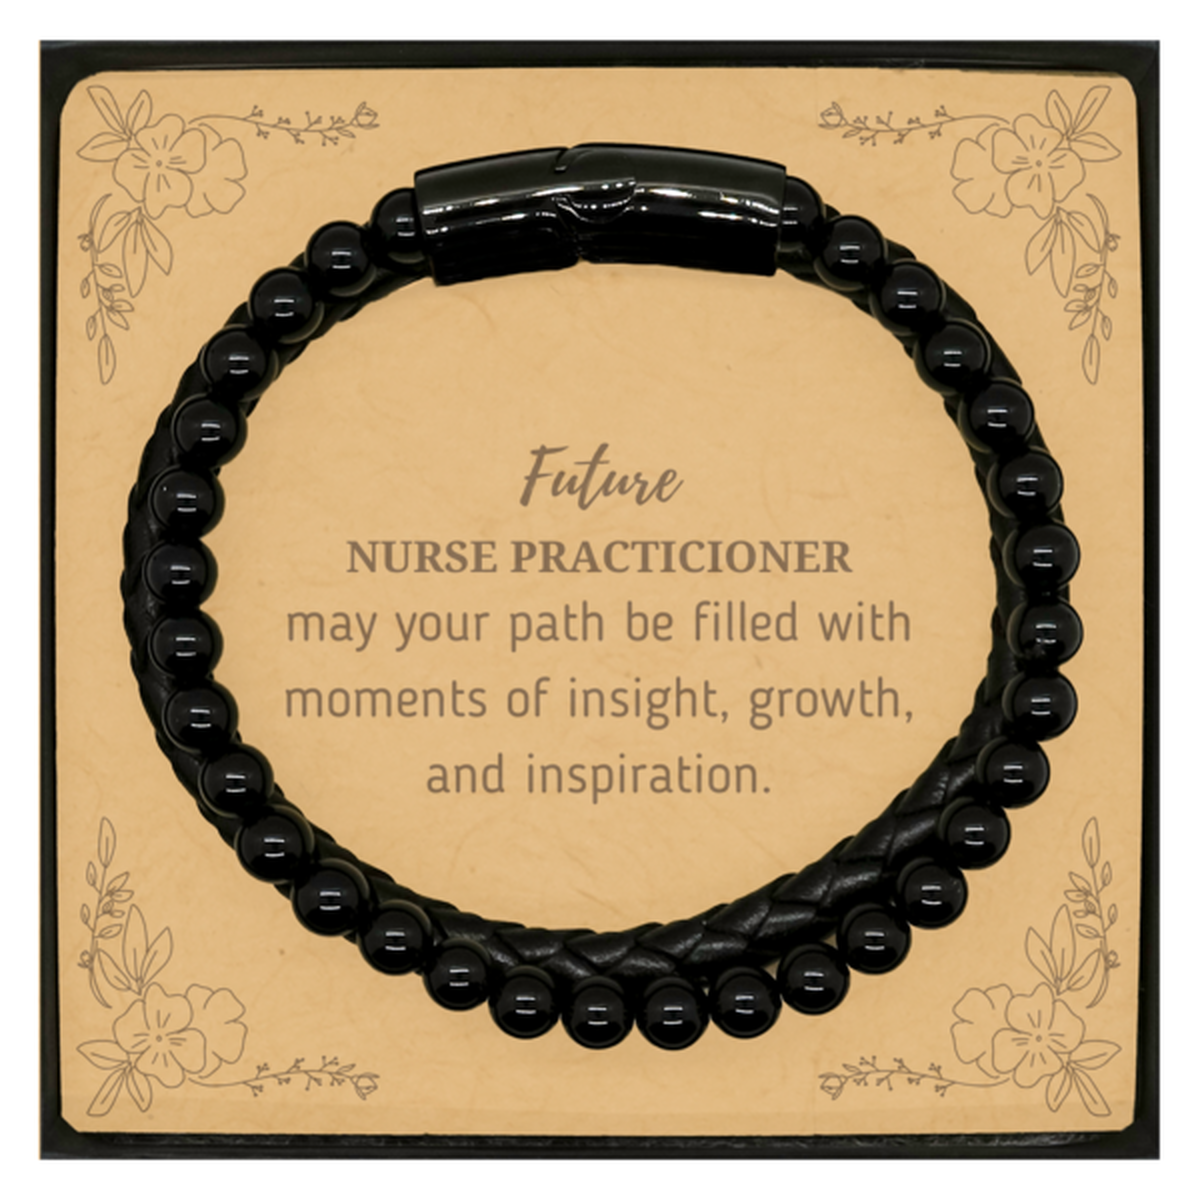 Future Nurse Practicioner Gifts, May your path be filled with moments of insight, Graduation Gifts for New Nurse Practicioner, Christmas Unique Stone Leather Bracelets For Men, Women, Friends